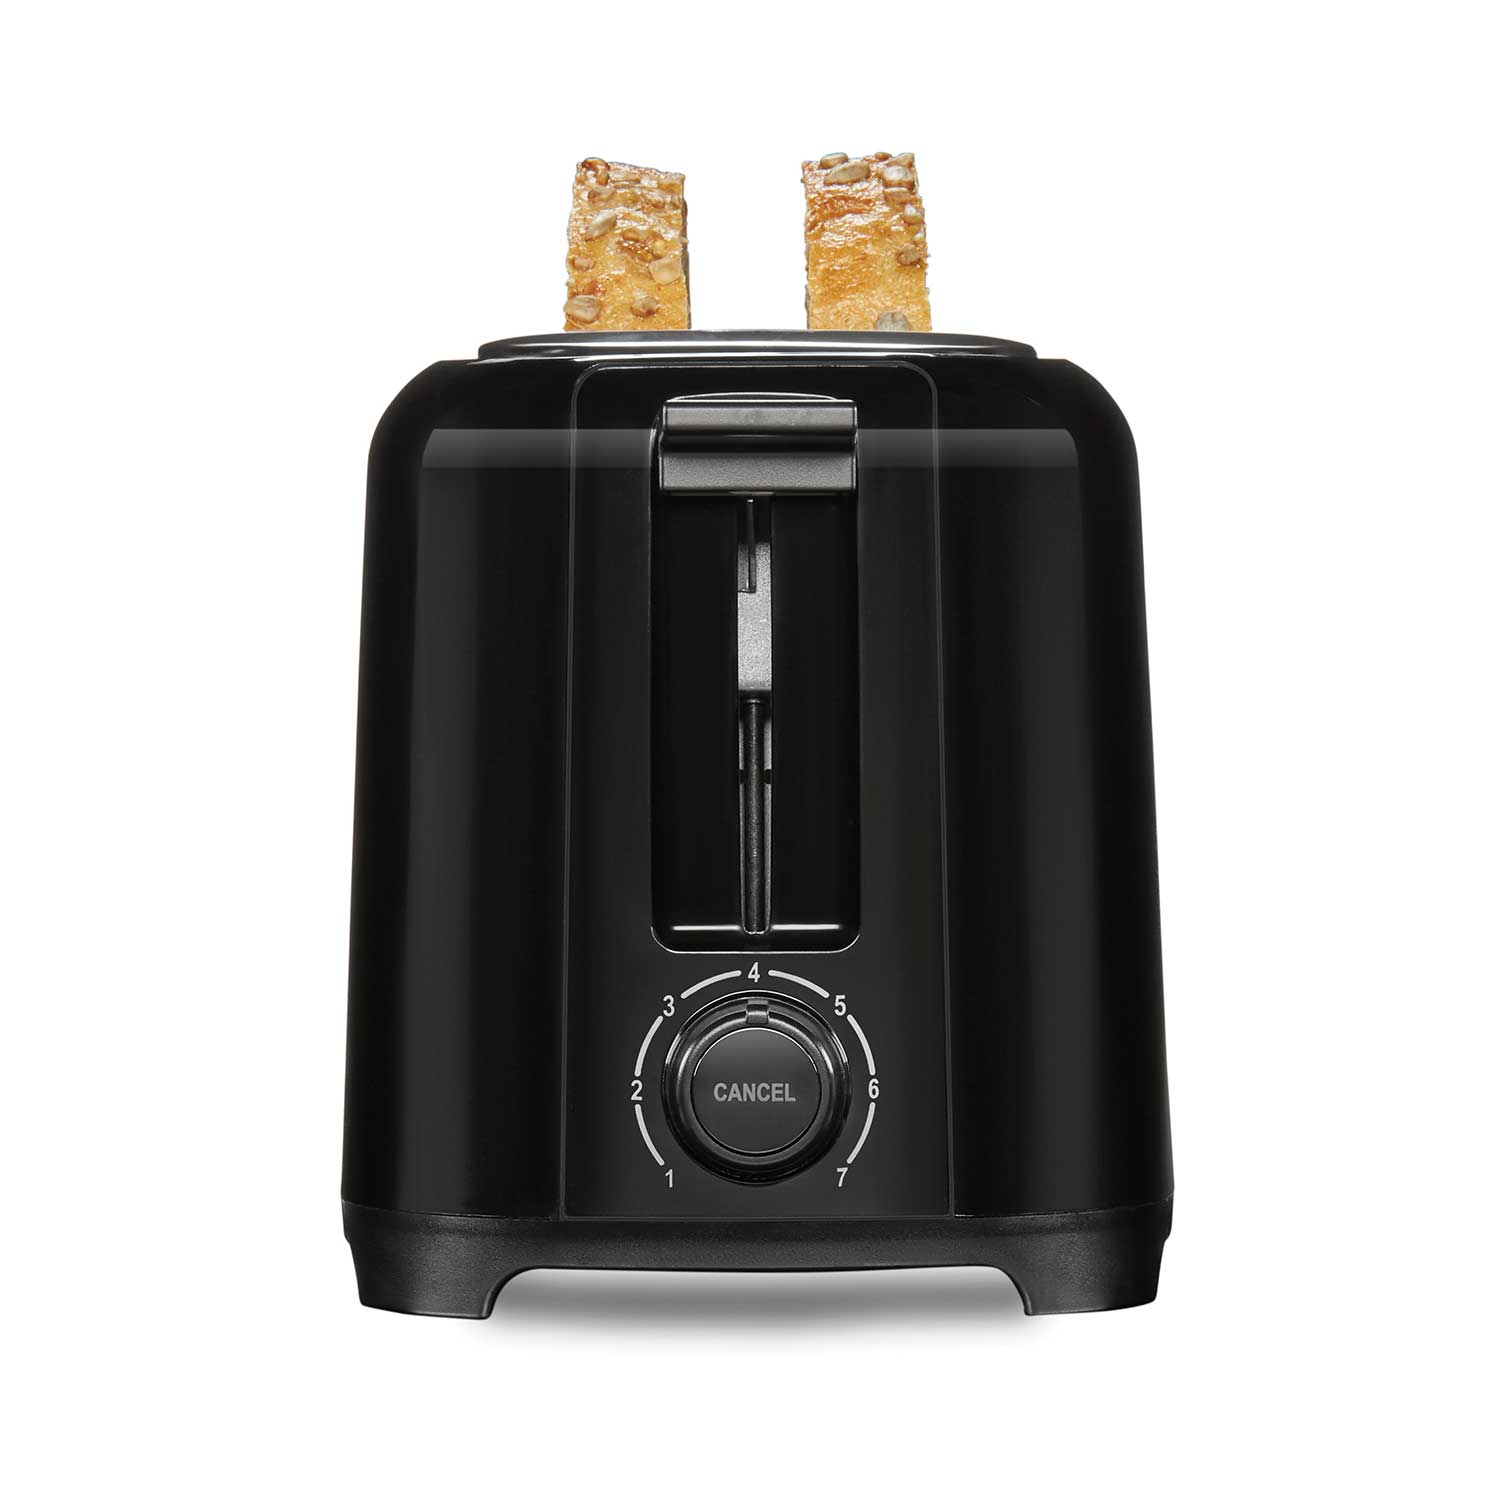 Wide-Slot 2 Slice Toaster - 22215PS Small Size